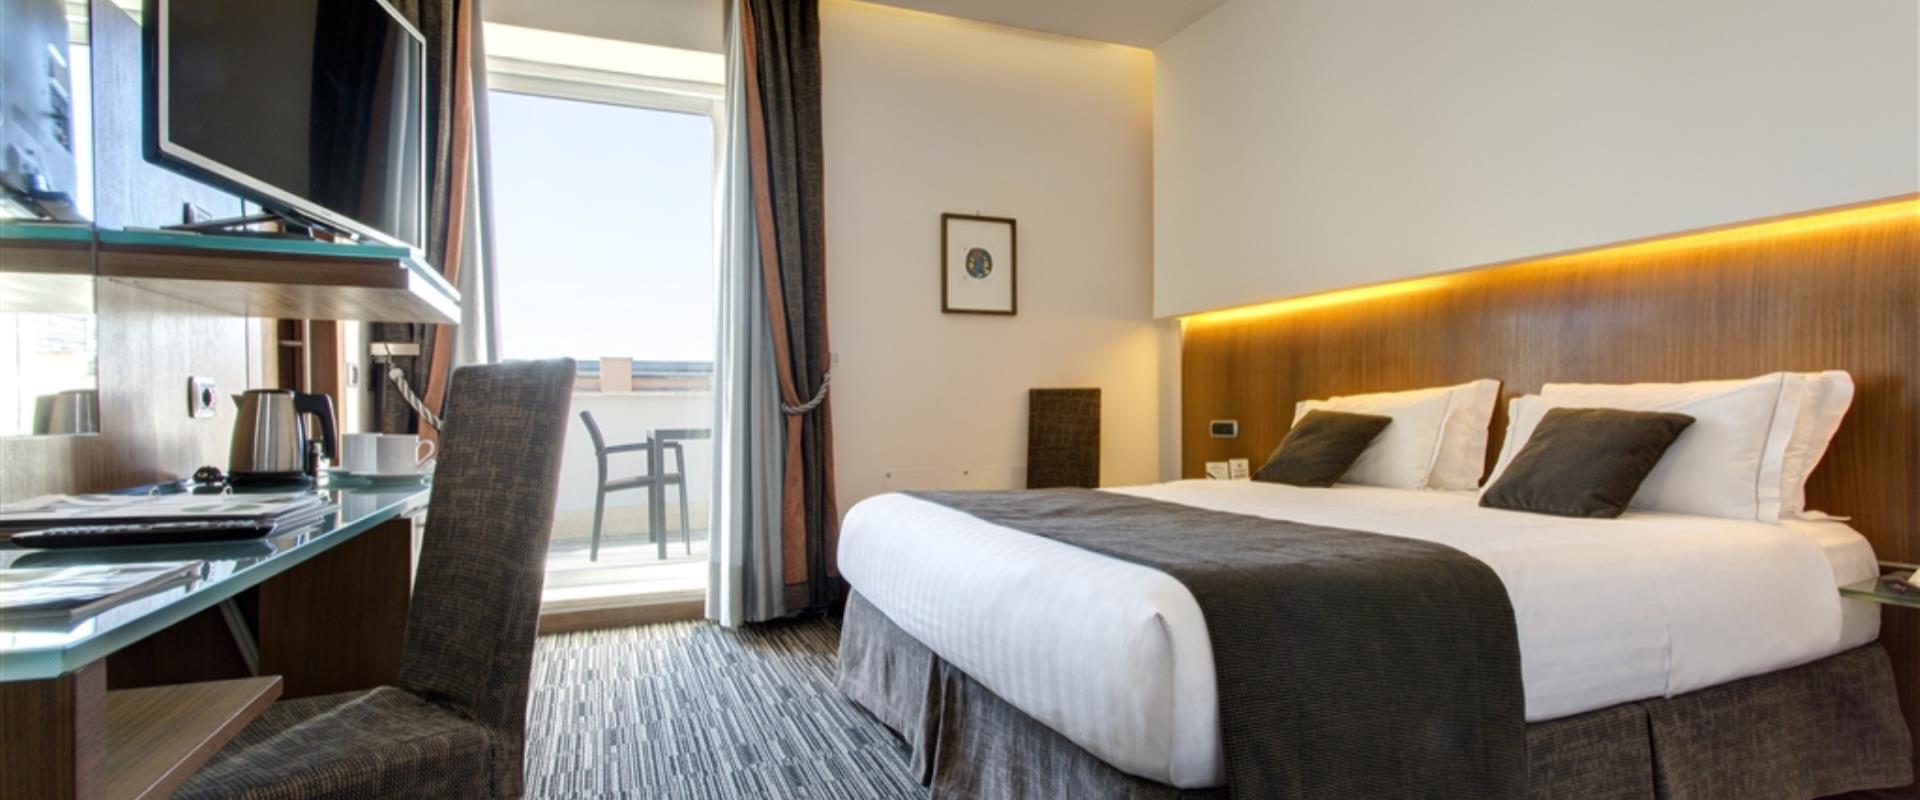 Book/reserve a room in Roma, stay at the Best Western Plus Hotel Universo